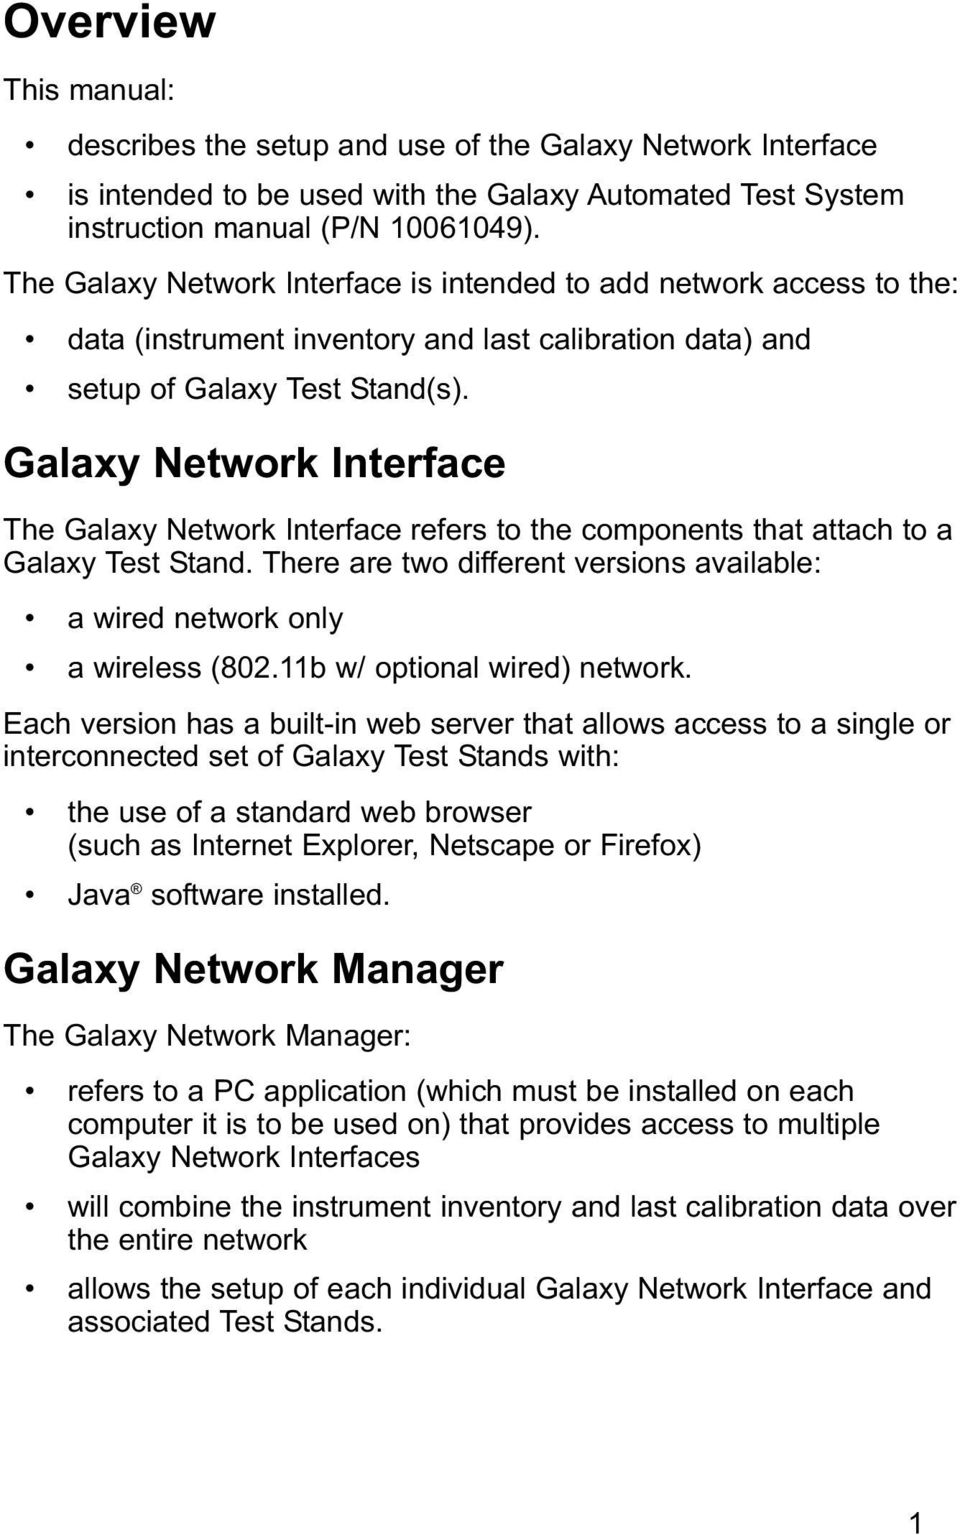 Galaxy Network Interface The Galaxy Network Interface refers to the components that attach to a Galaxy Test Stand. There are two different versions available: a wired network only a wireless (802.